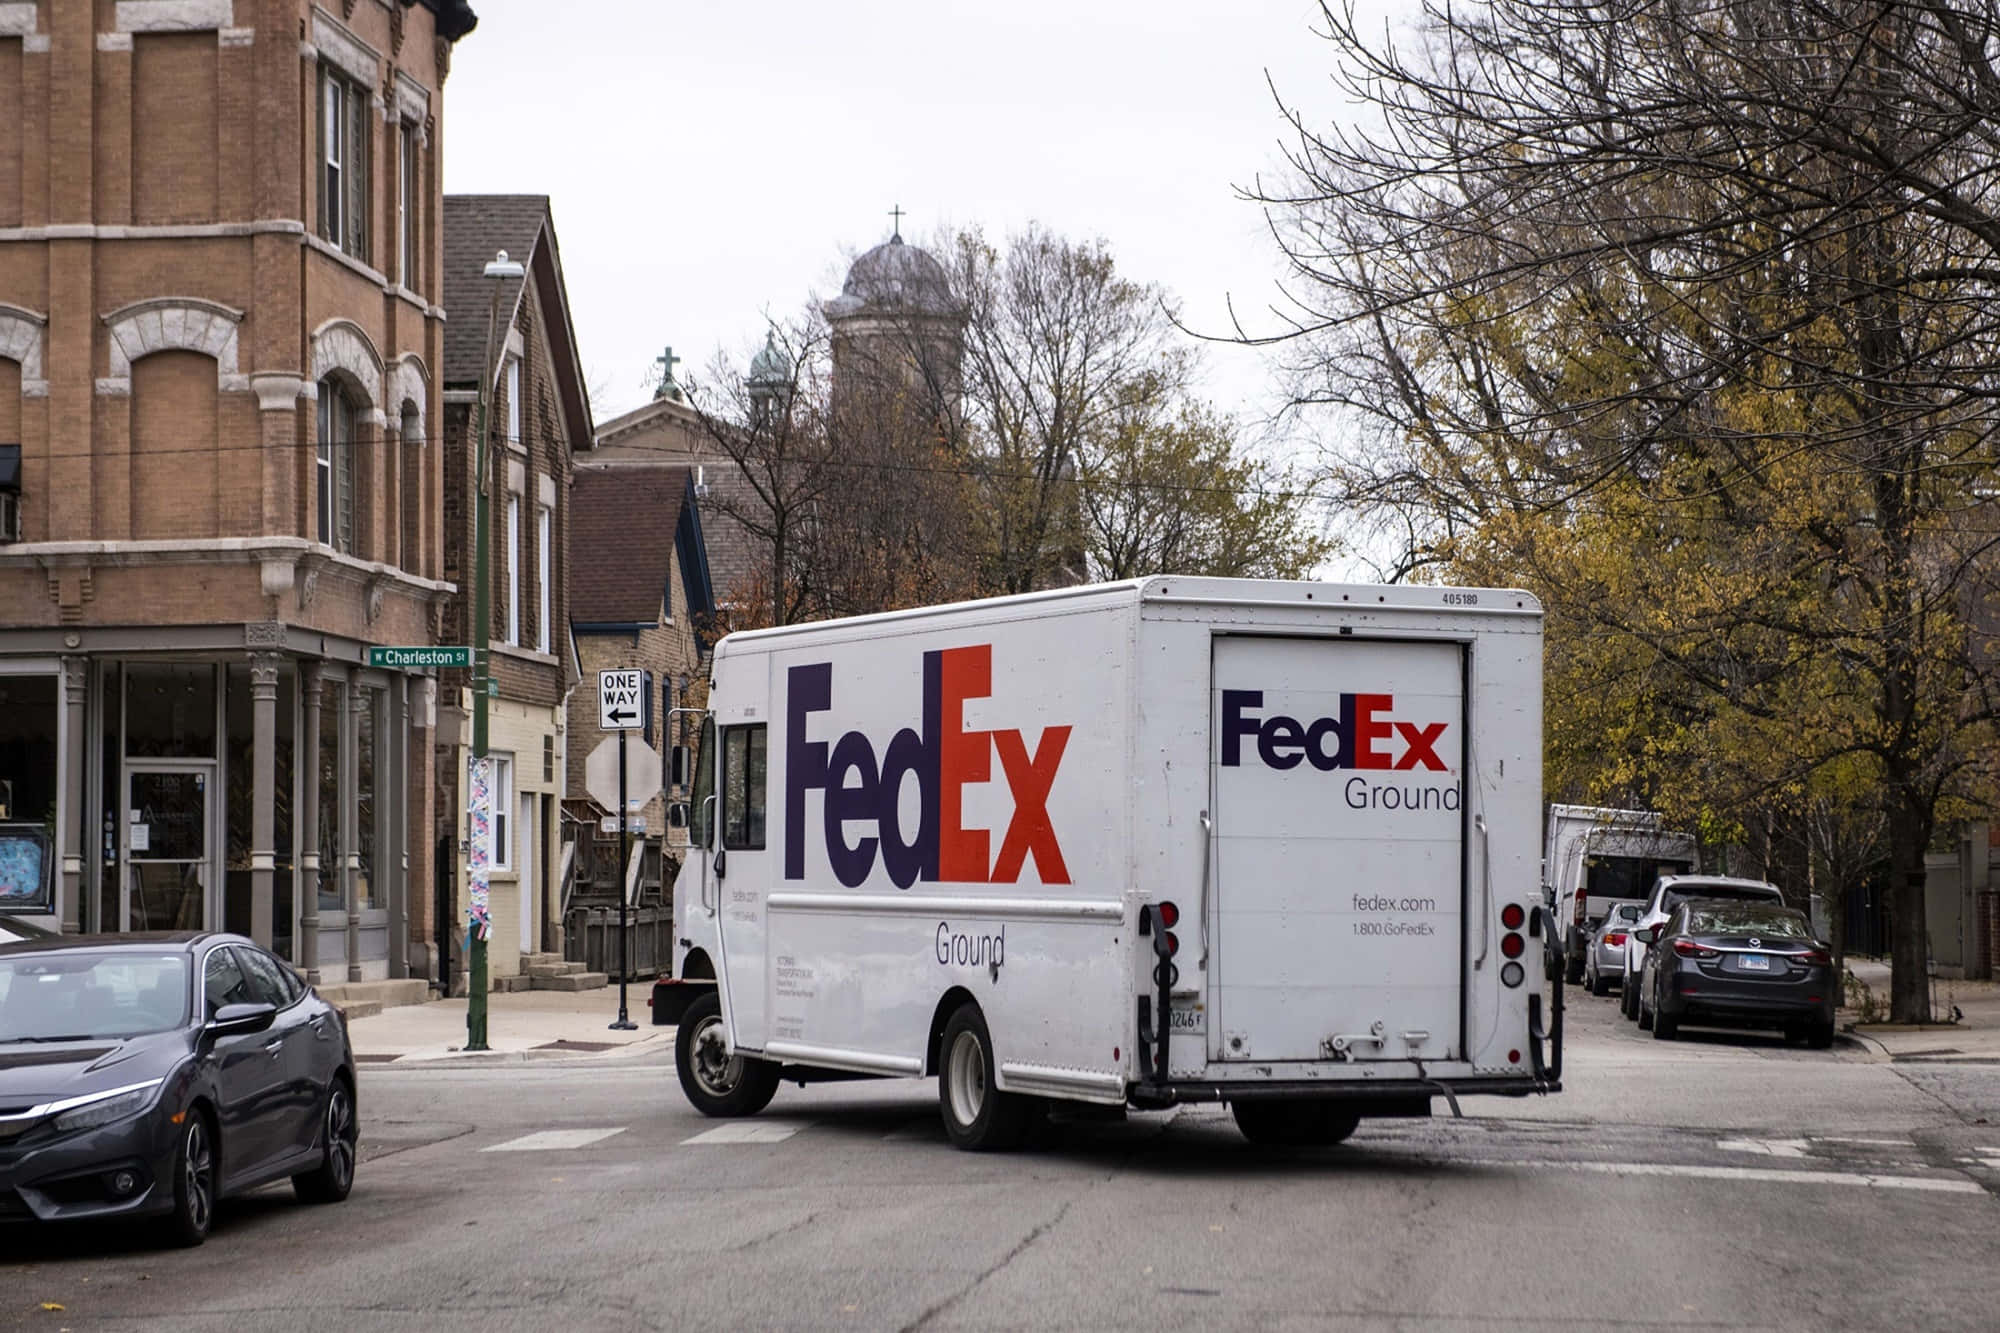 Fedex – Fast and Reliable Shipping